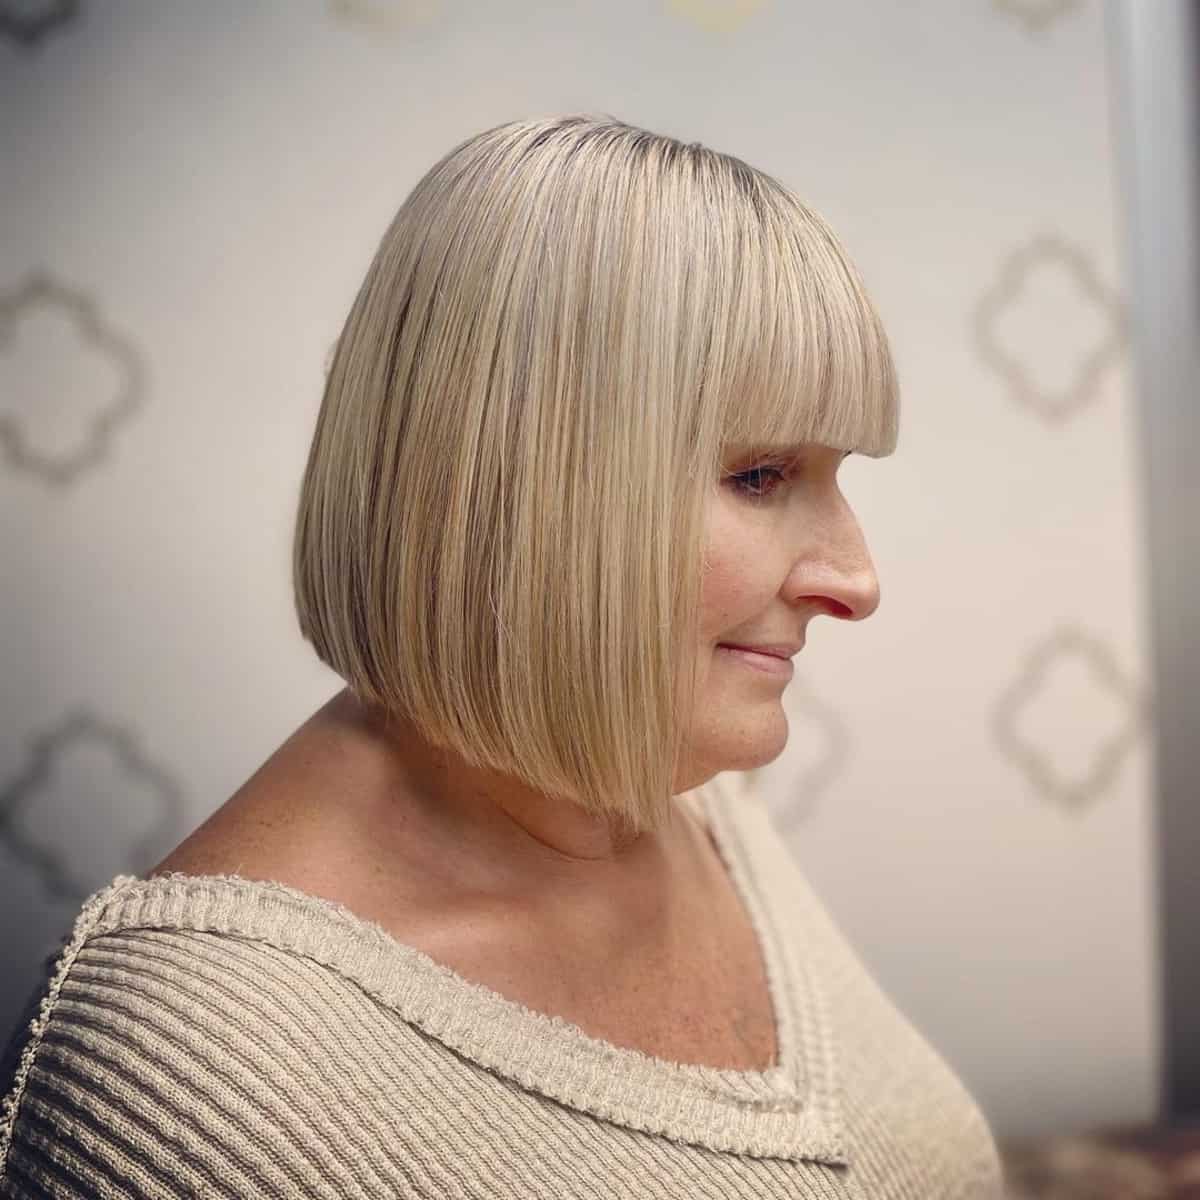 Short Bob with Bangs for Women in Their 60s